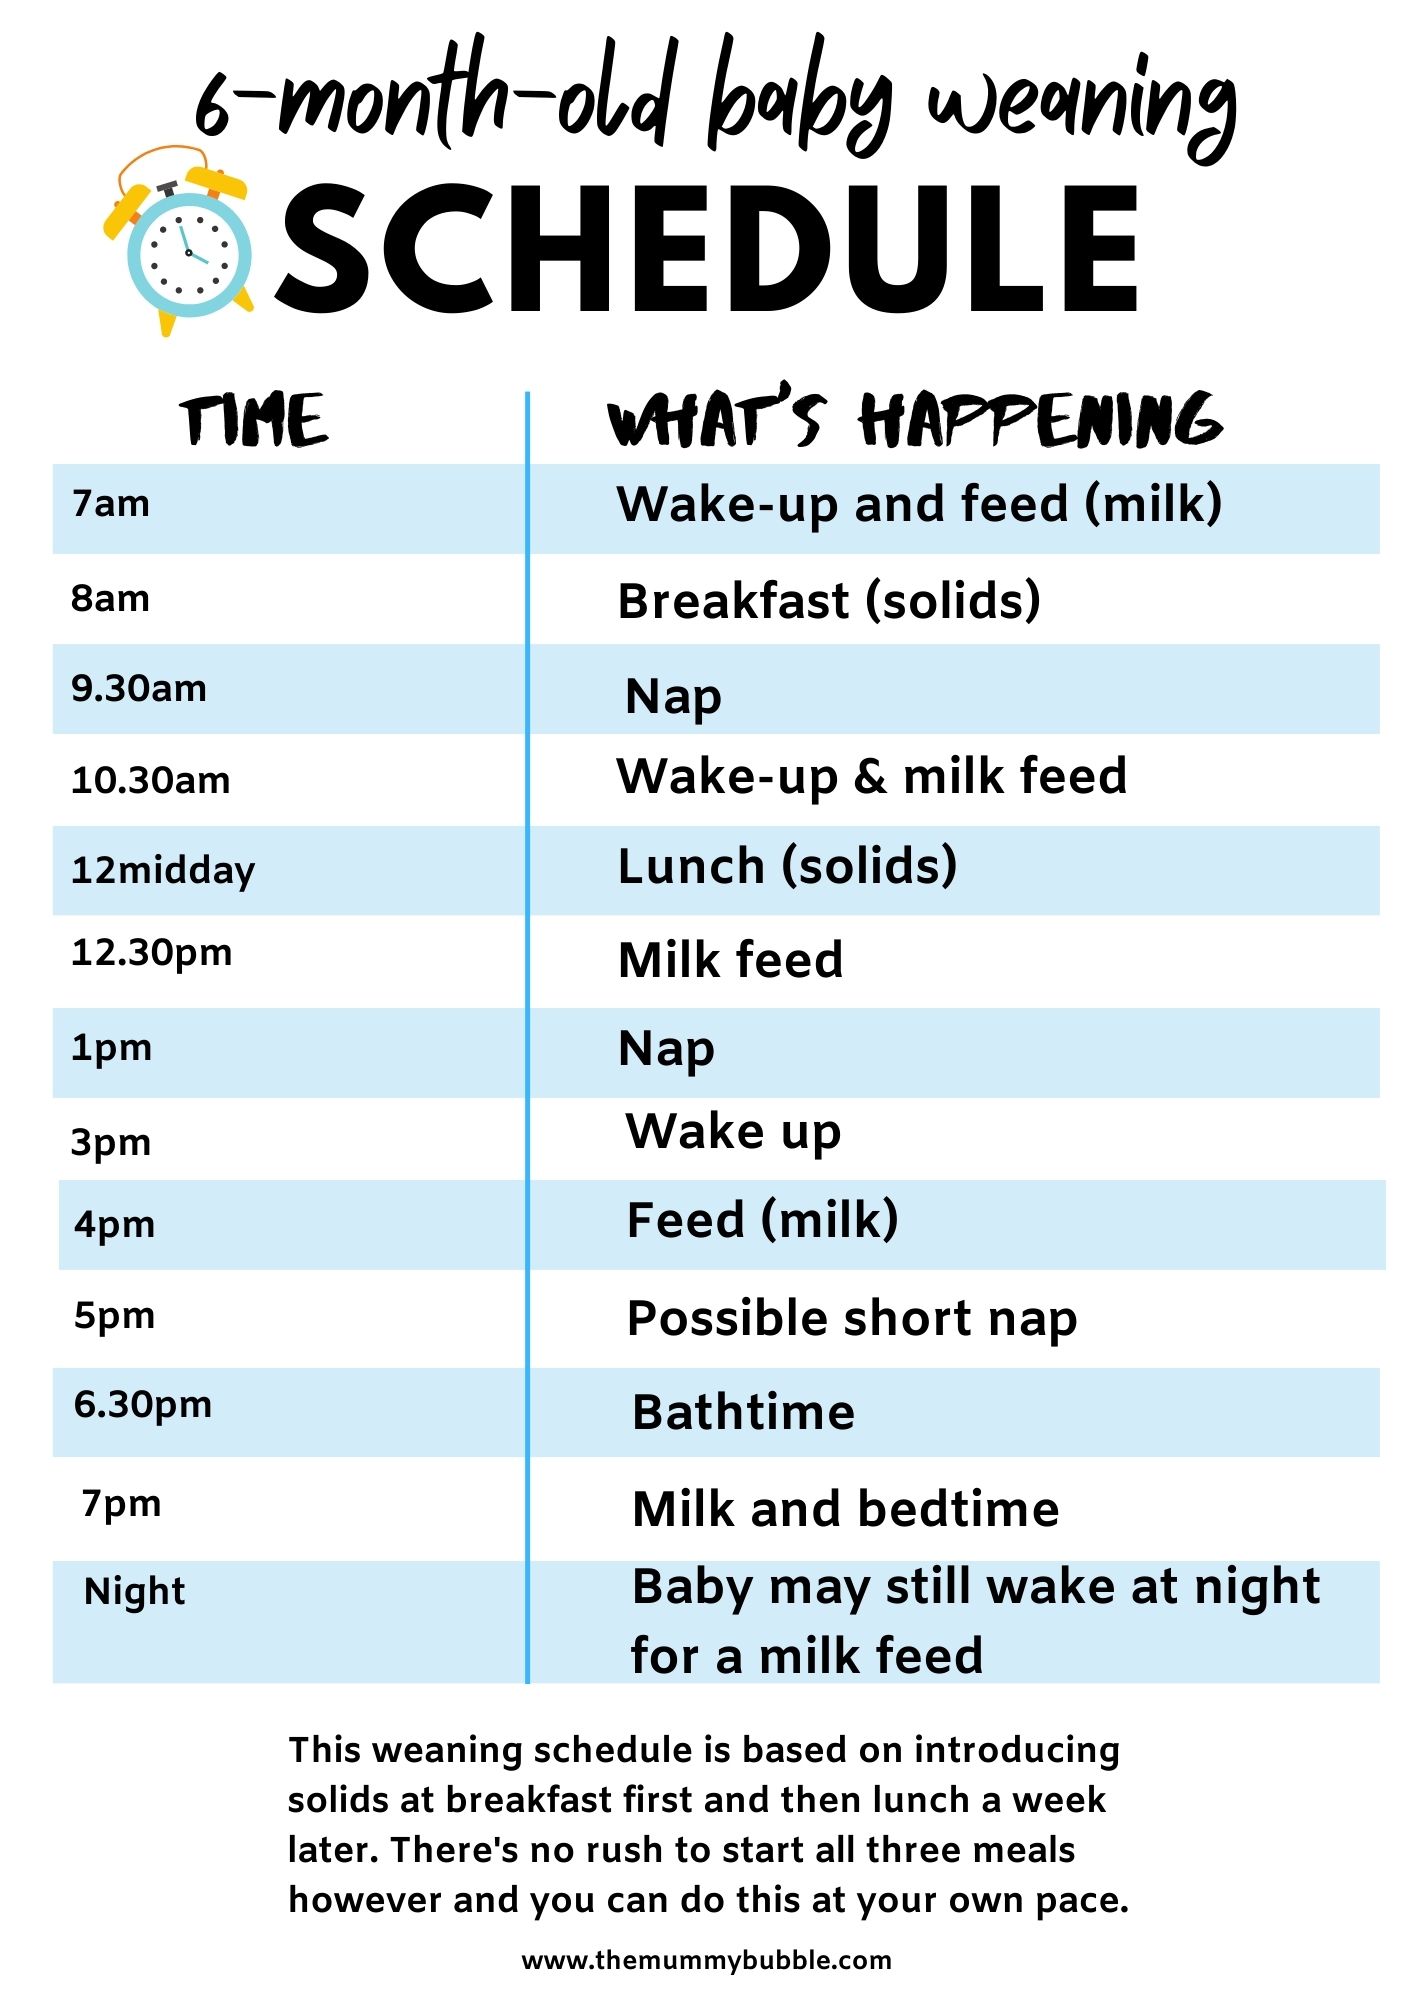 https://themummybubble.co.uk/wp-content/uploads/2023/05/6-month-old-baby-weaning-schedule.jpg